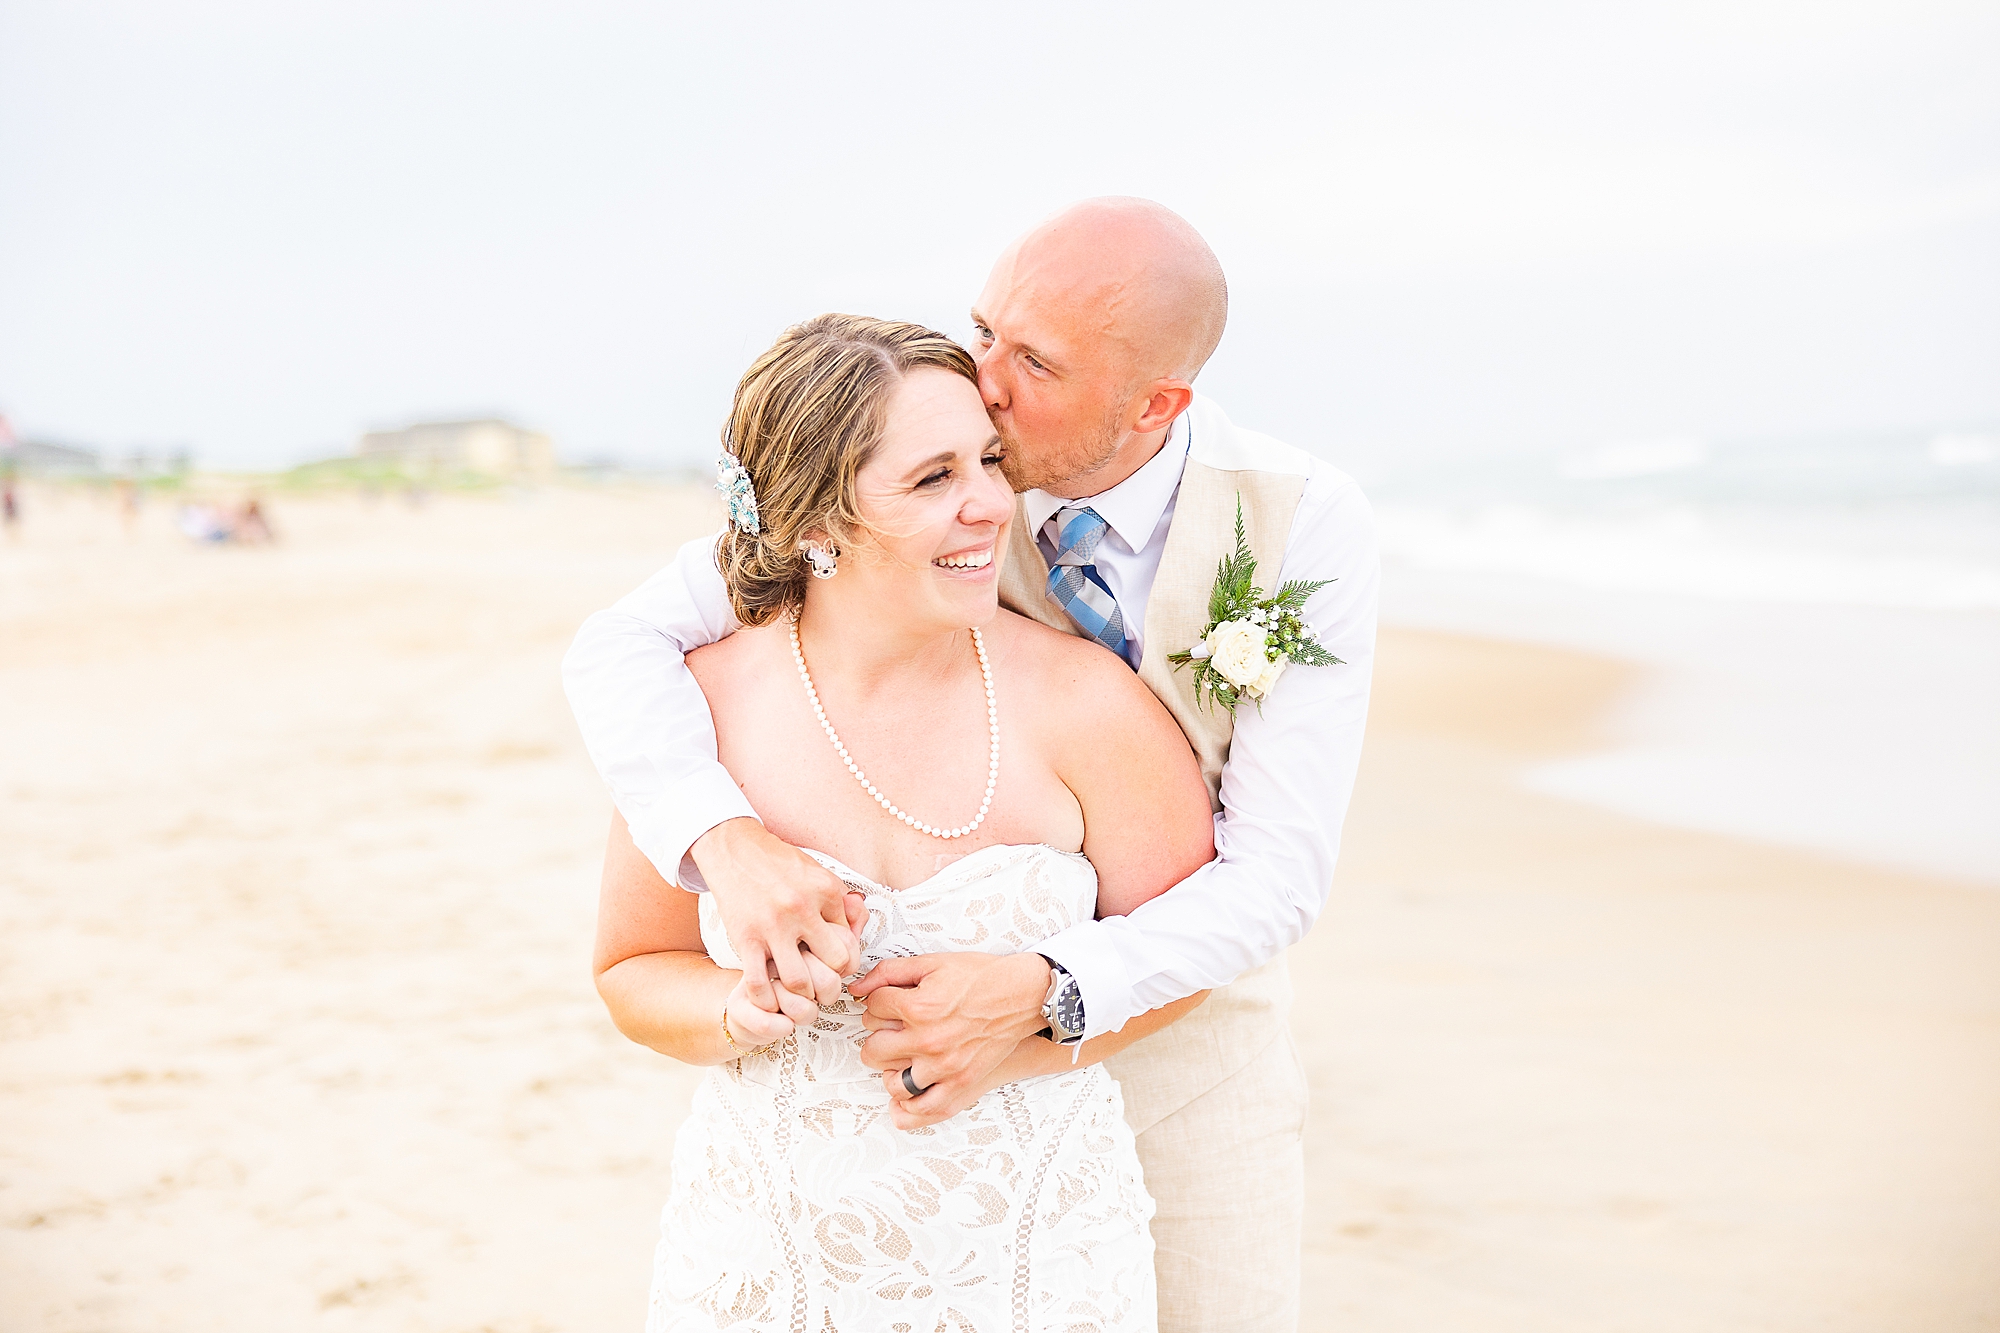 groom kisses bride's forehead from behind during wedding photos on beach